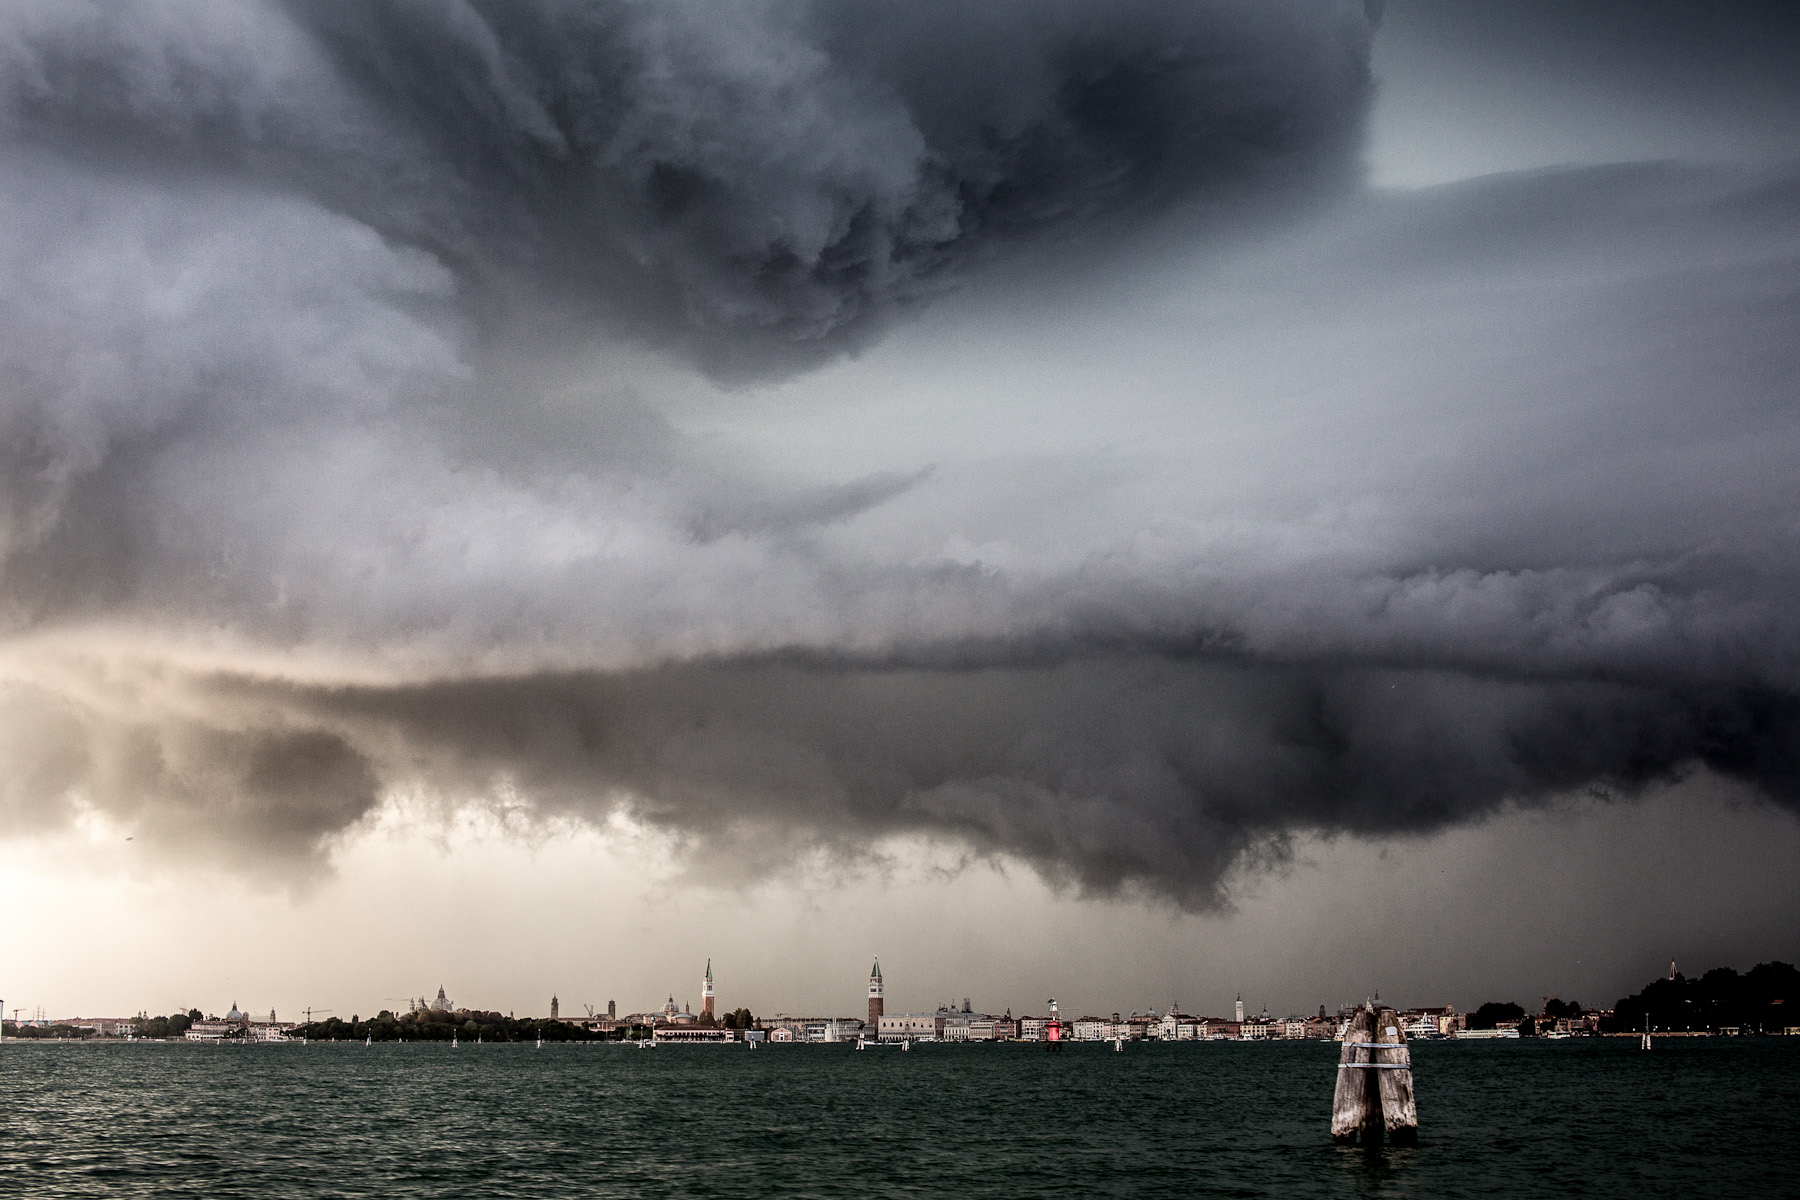 A storm looms over the city of Venice on September 26, 2012. Venice is subject to strong storms, Bora and scirocco winds that bring waves and high tides that eventually flood the city. Storms at sea and inland are especially dangerous. The open sea storms bring tides, while the inland storms bring flooding from rivers that flow into the lagoon.